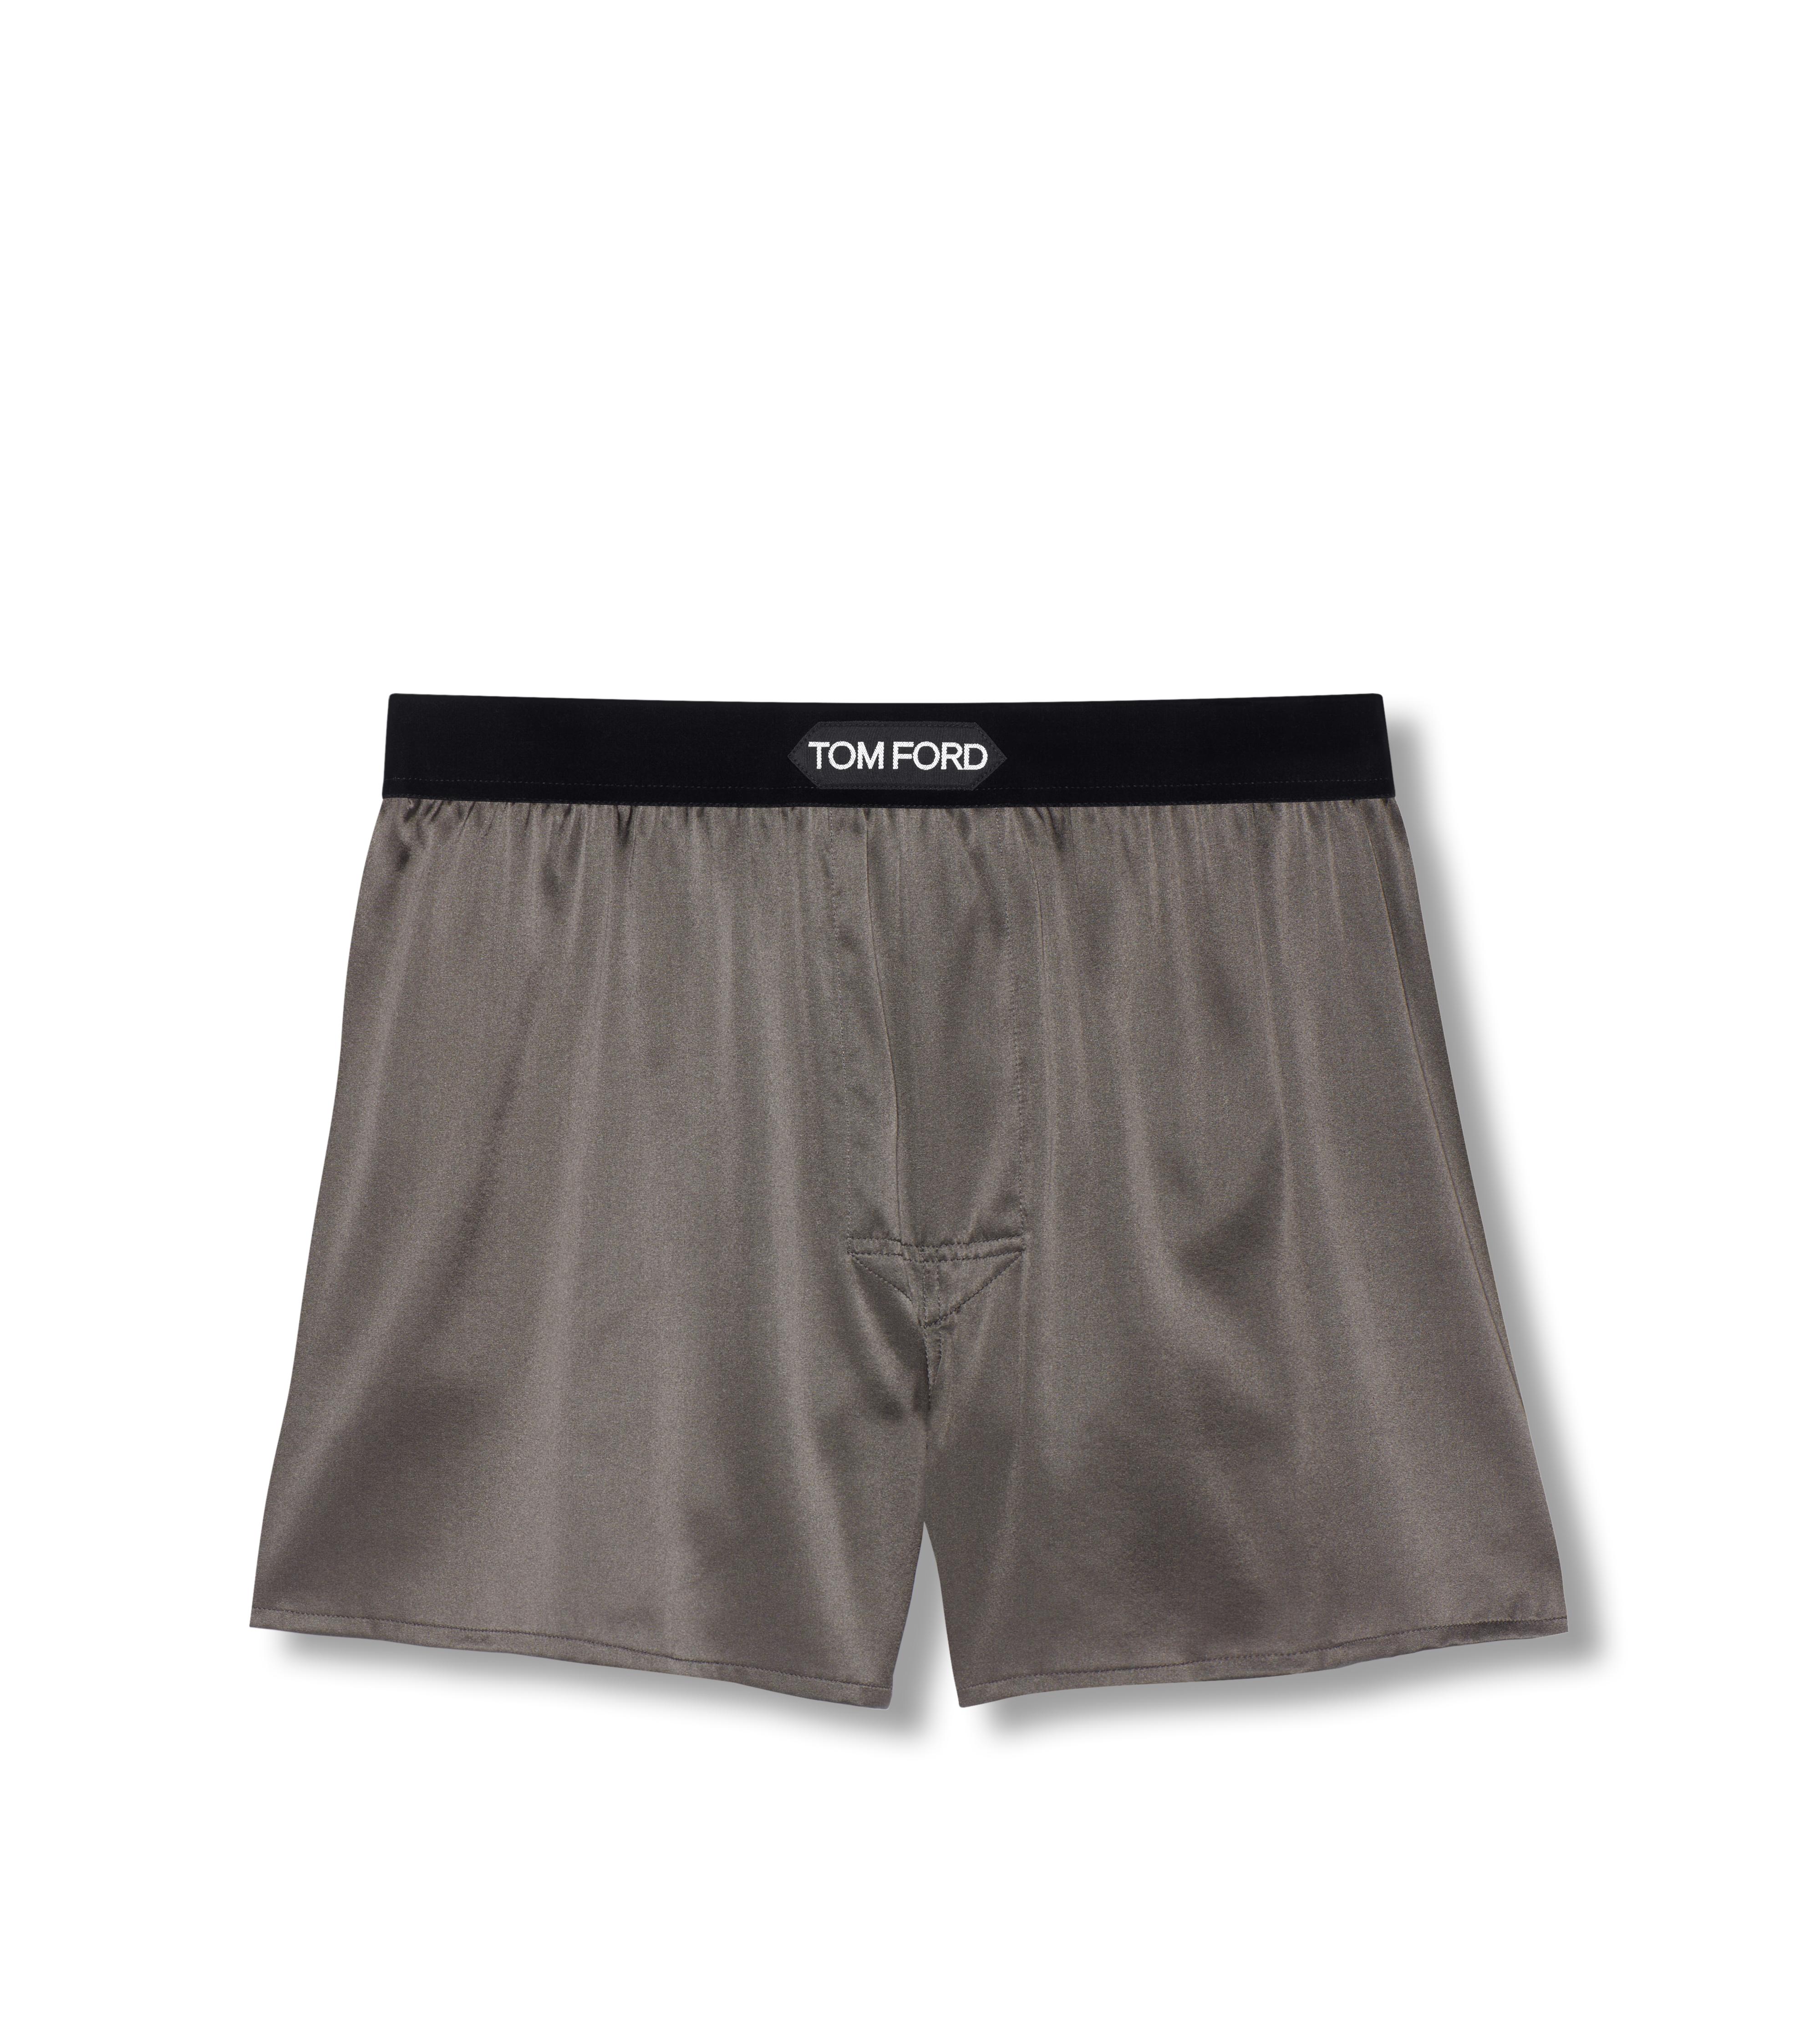 BOXERS Collection | Tom Ford